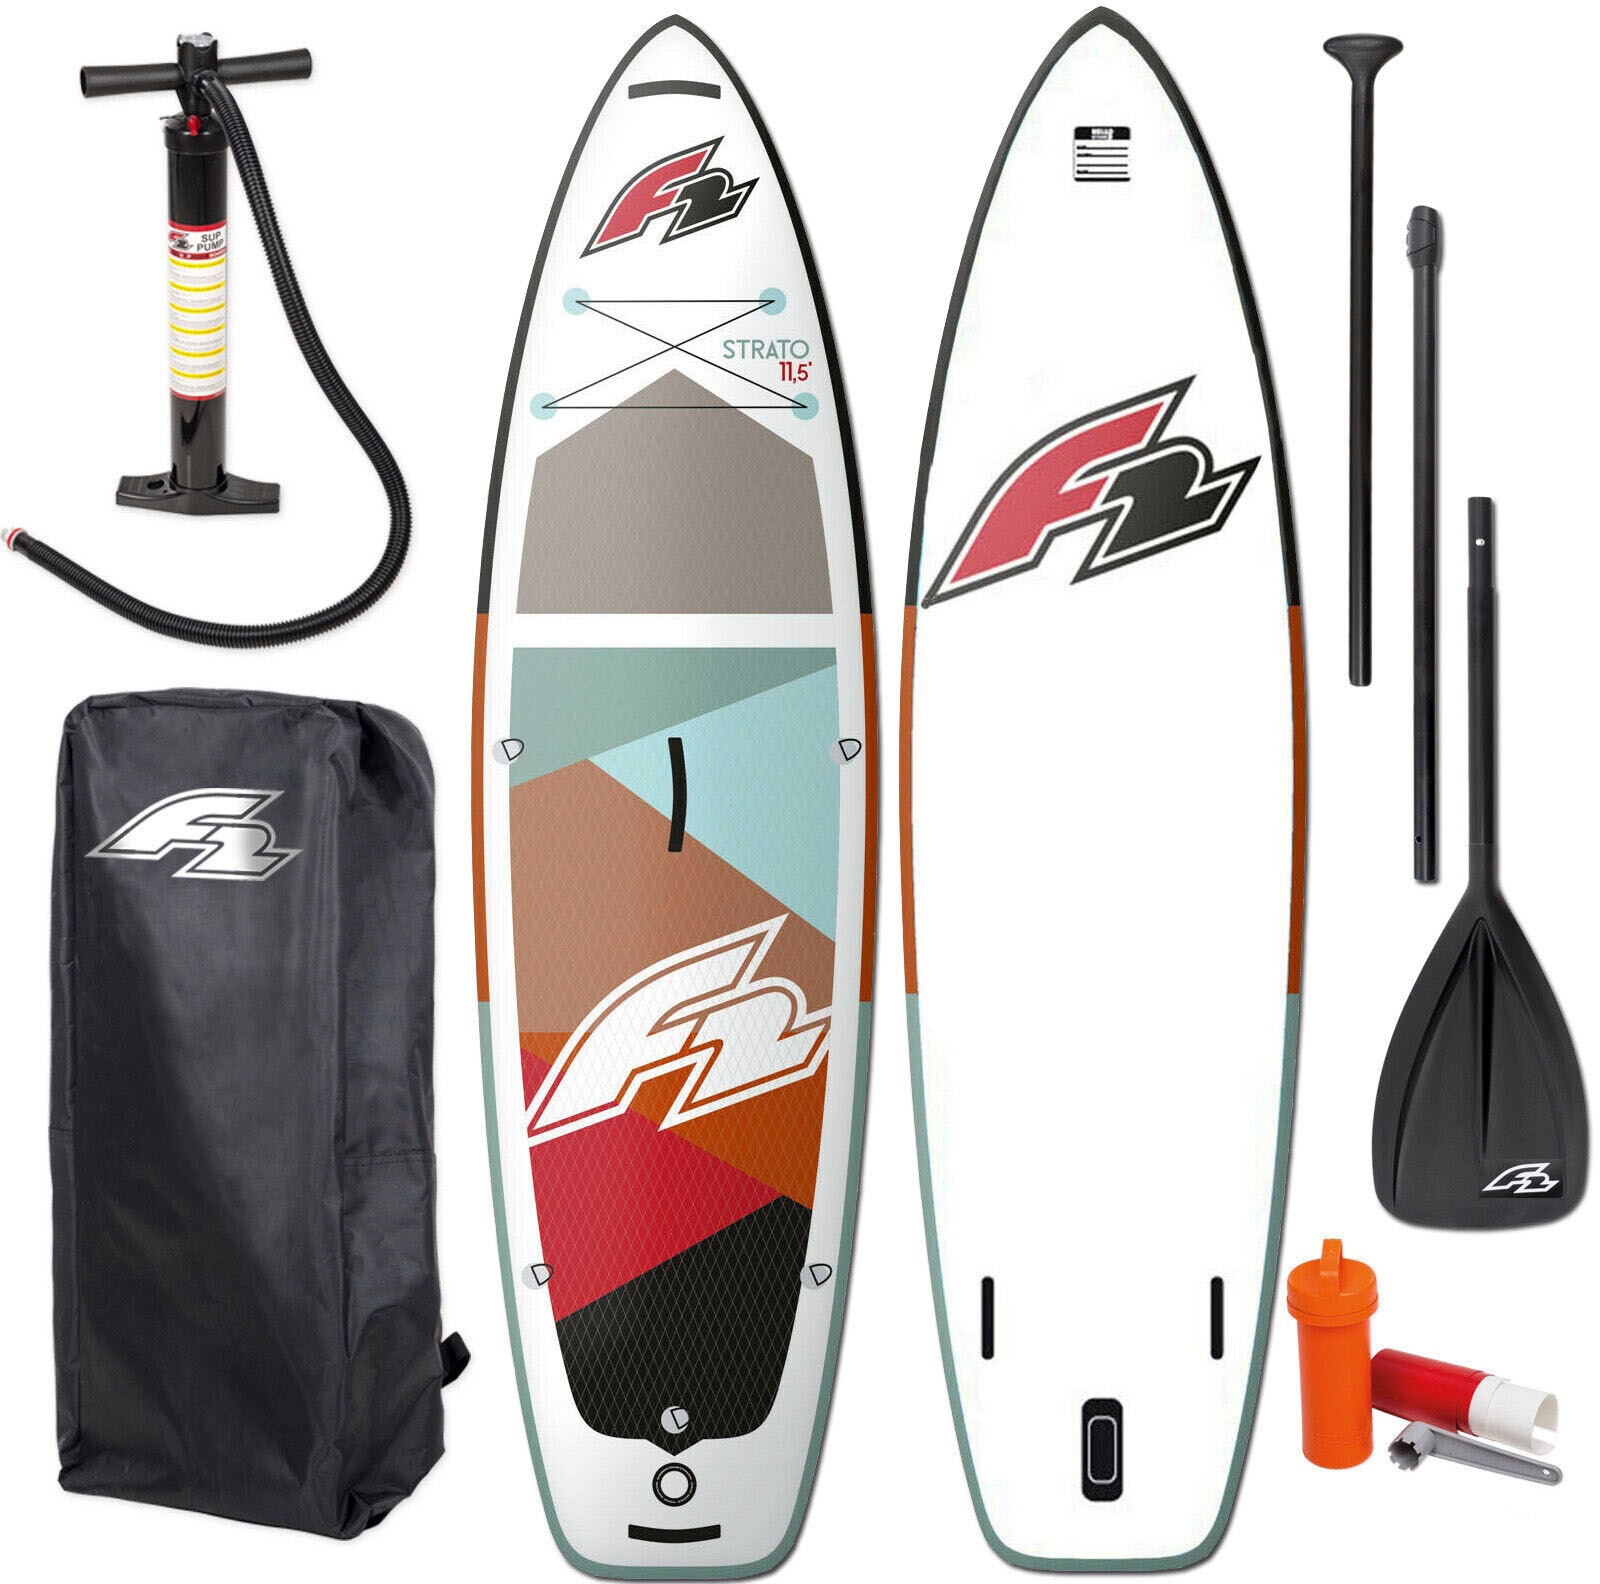 F2 Inflatable SUP-Board »Strato red«, 5 (Packung, bei 10,5 tlg.) women